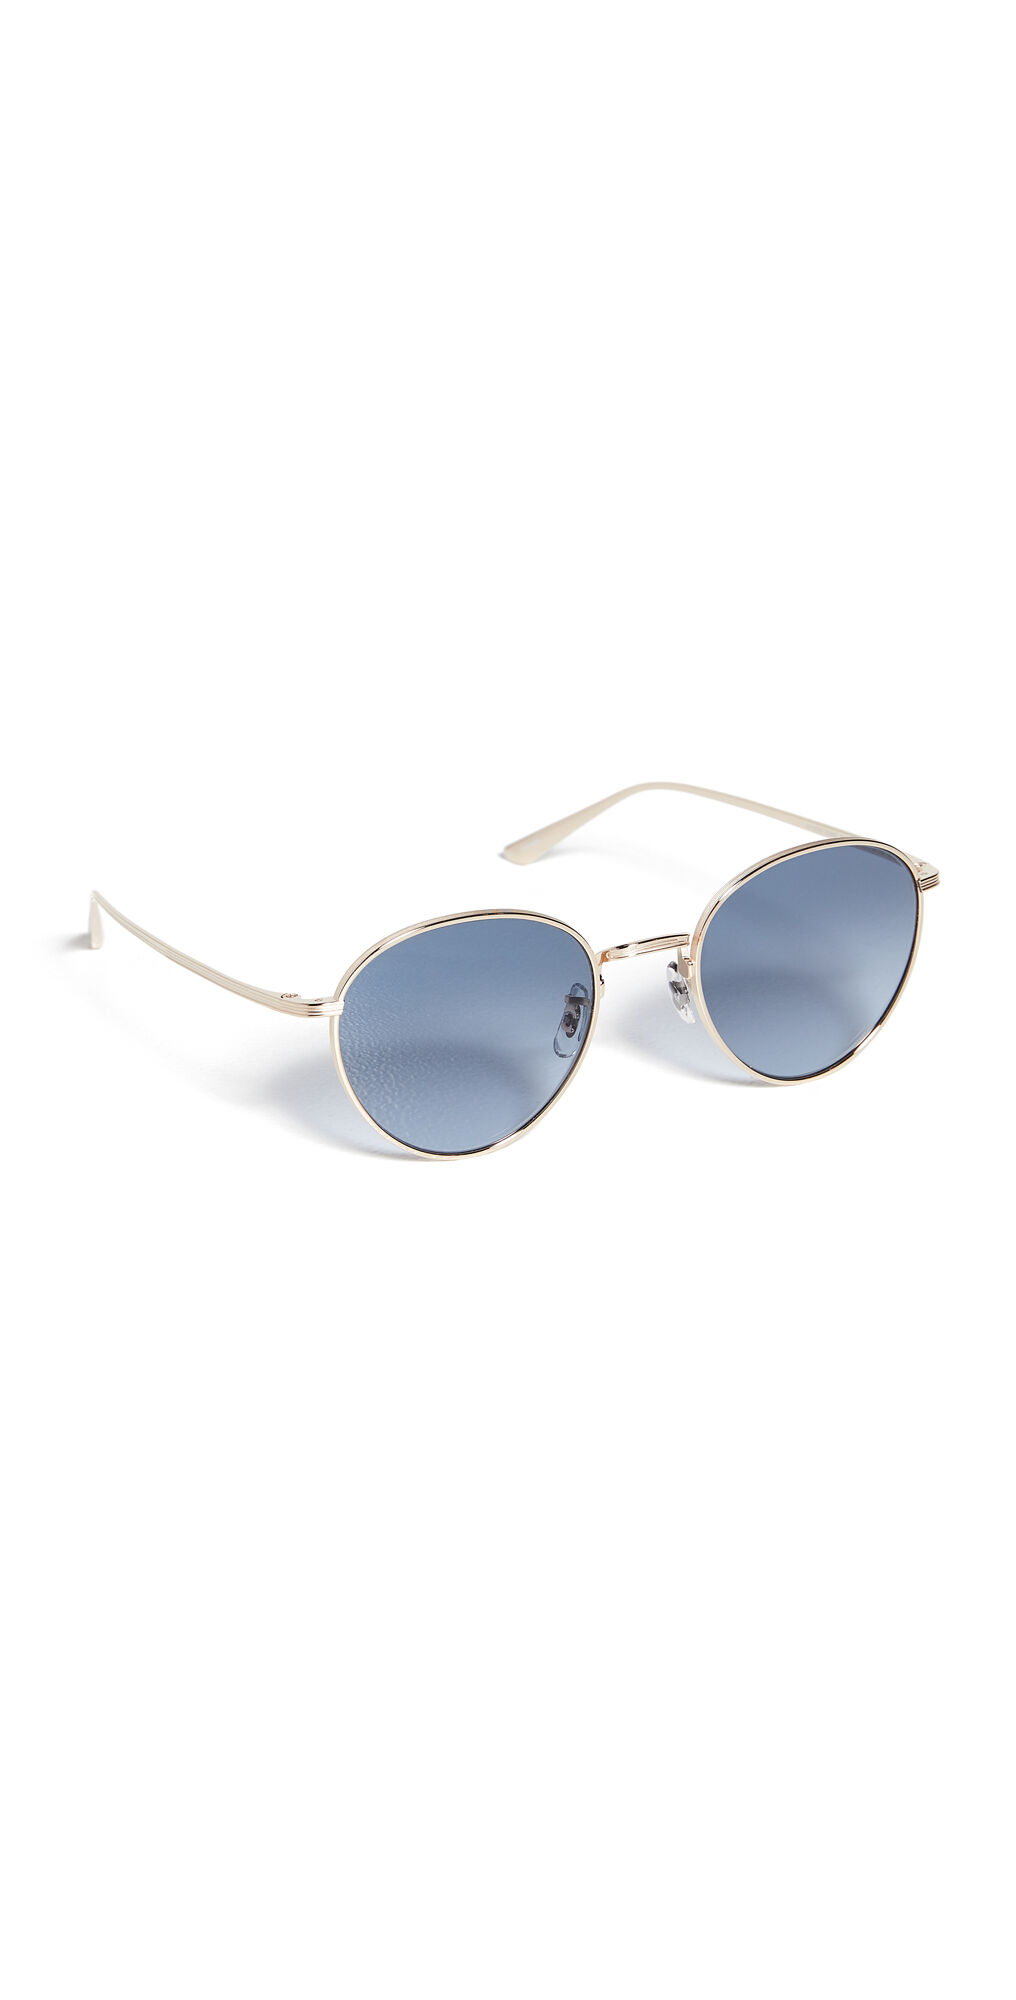 Oliver Peoples The Row Brownstone Sunglasses Gold with Marine Gradient Lens One Size  Gold With Marine Gradient Lens  size:One Size